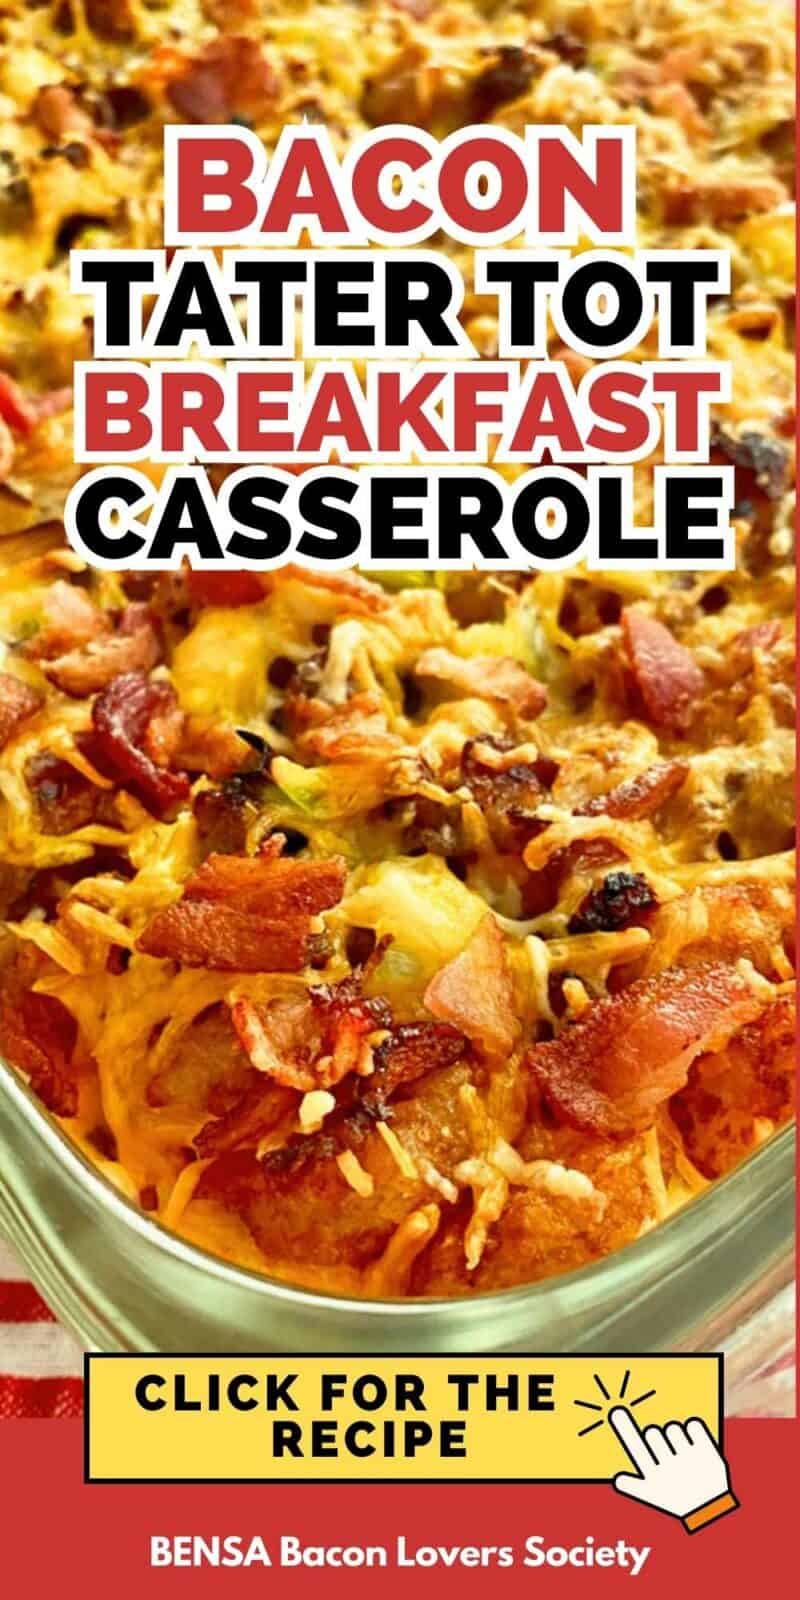 A glass baking dish filled with tater tot breakfast casserole with bacon, sausage and cheese.